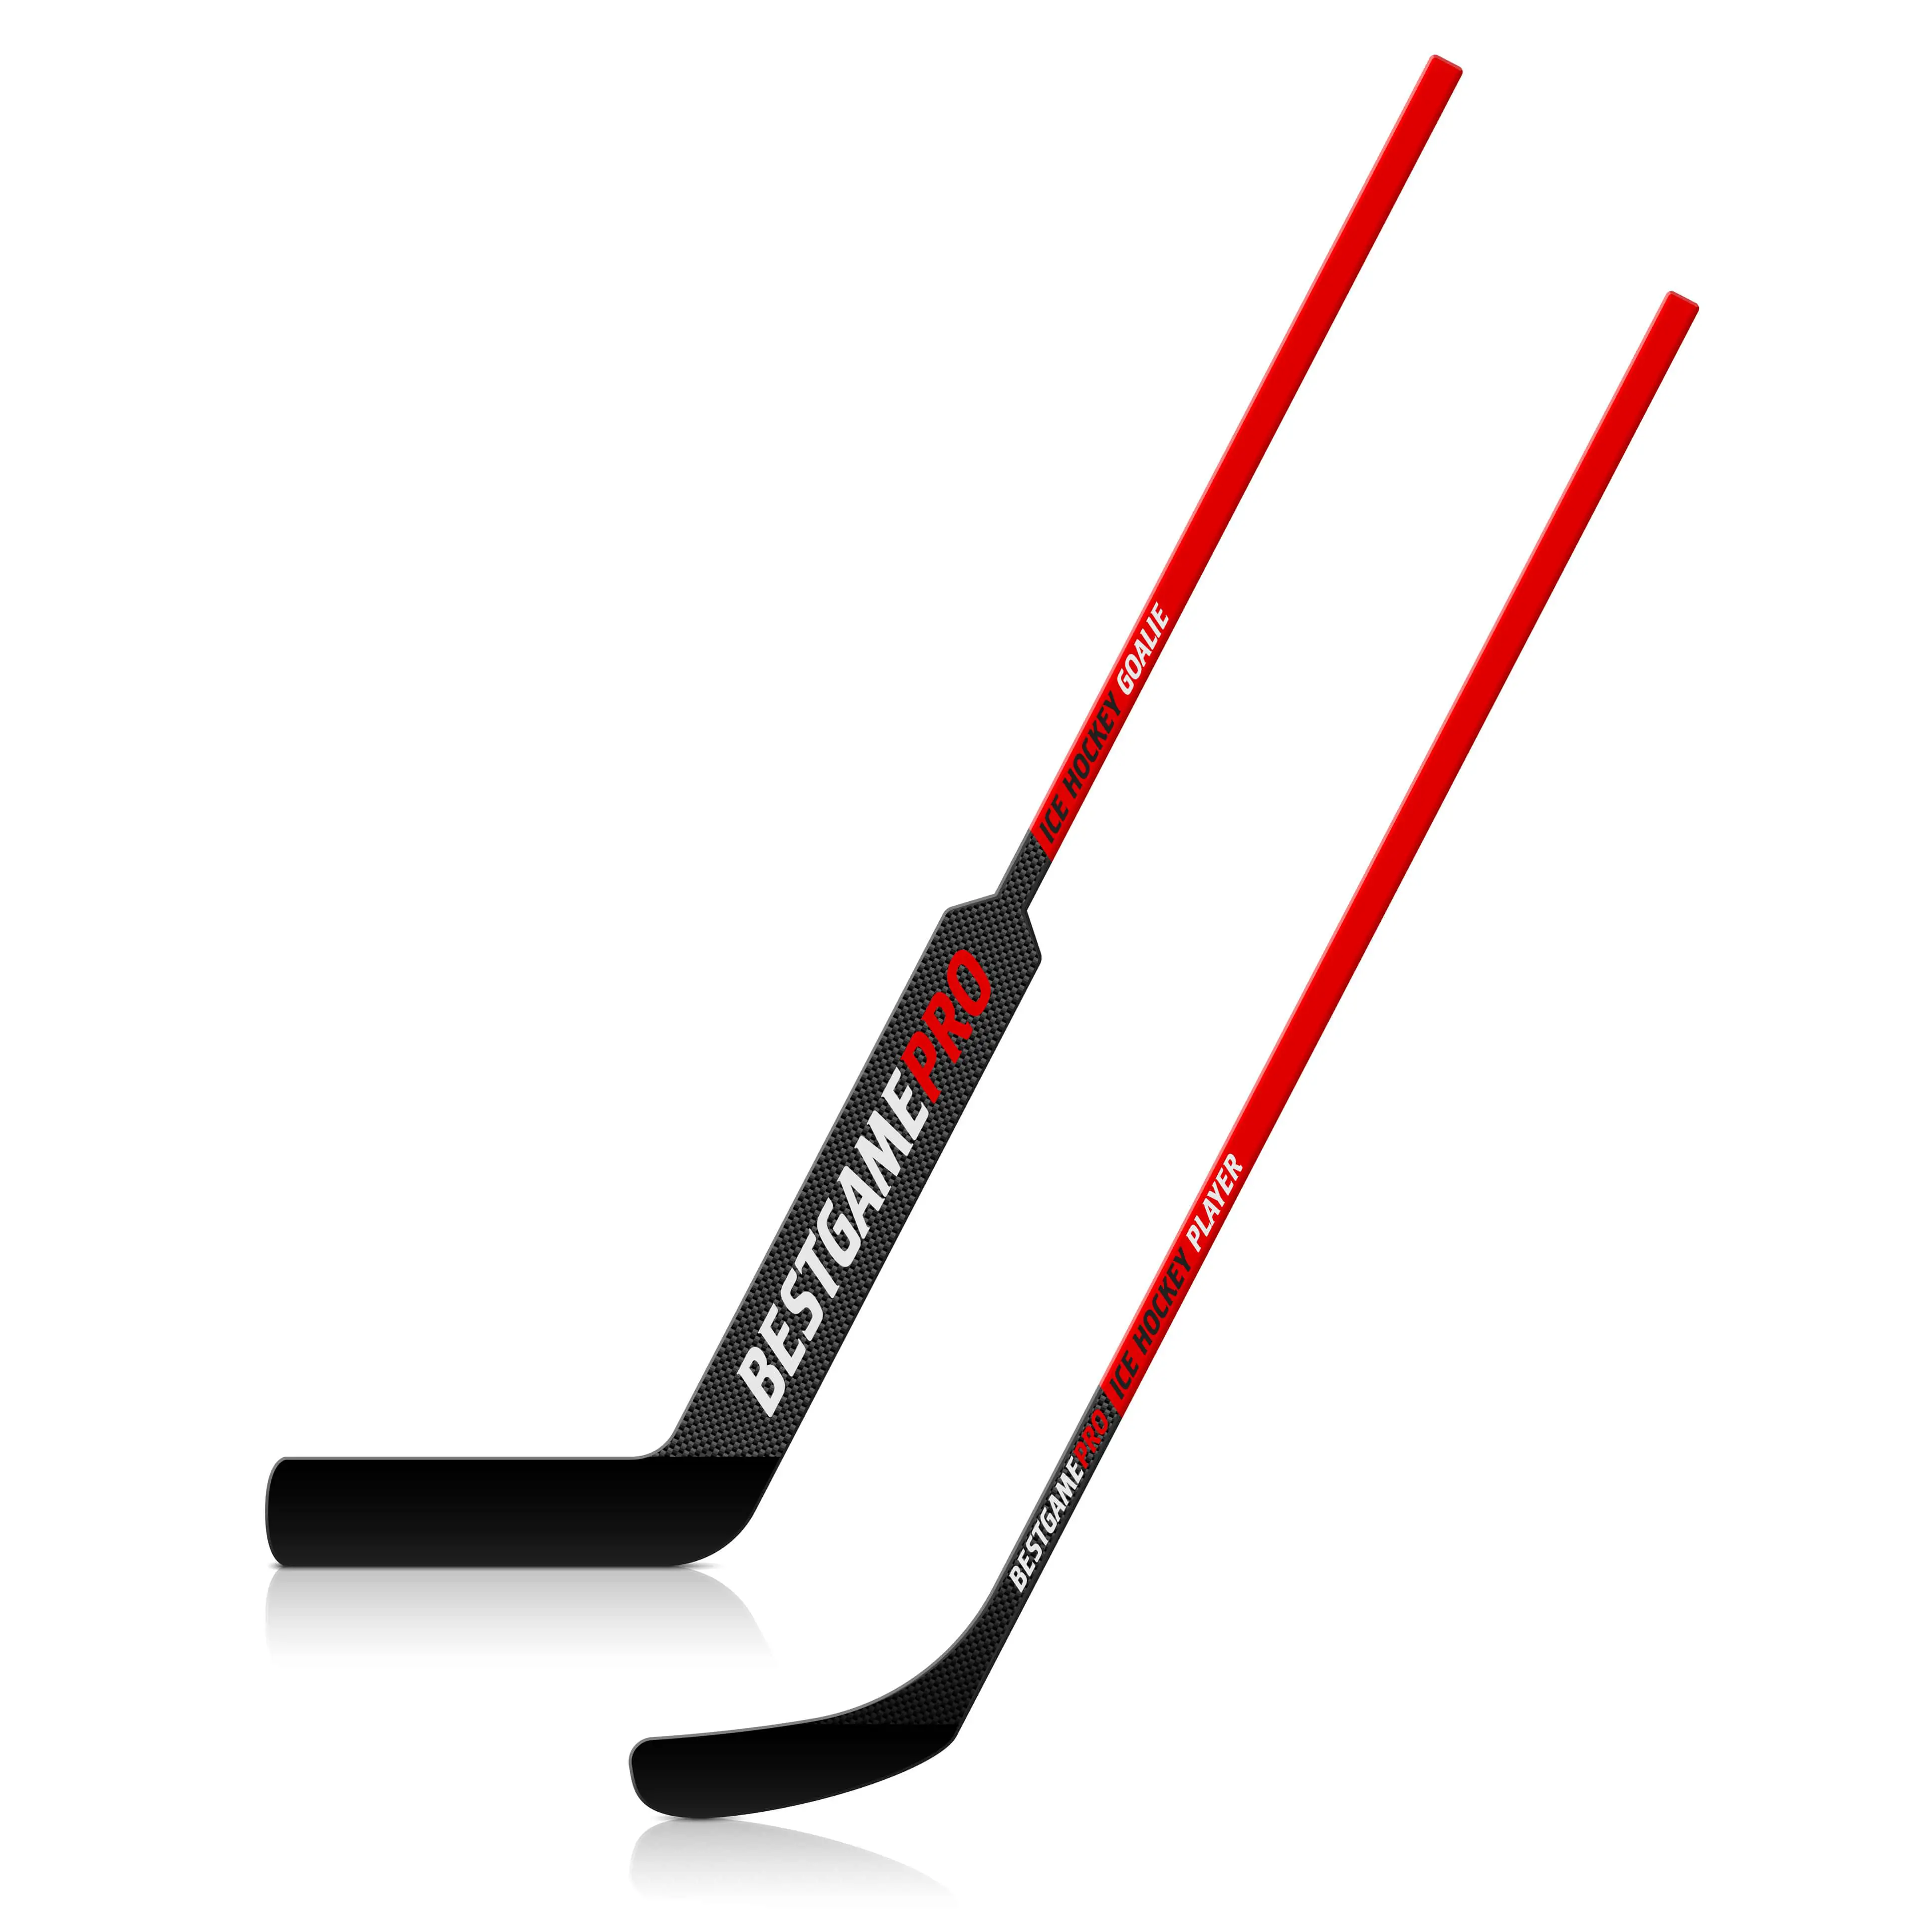 Hockey Goalie Sticks Unveiled: How They Differ From Player Sticks